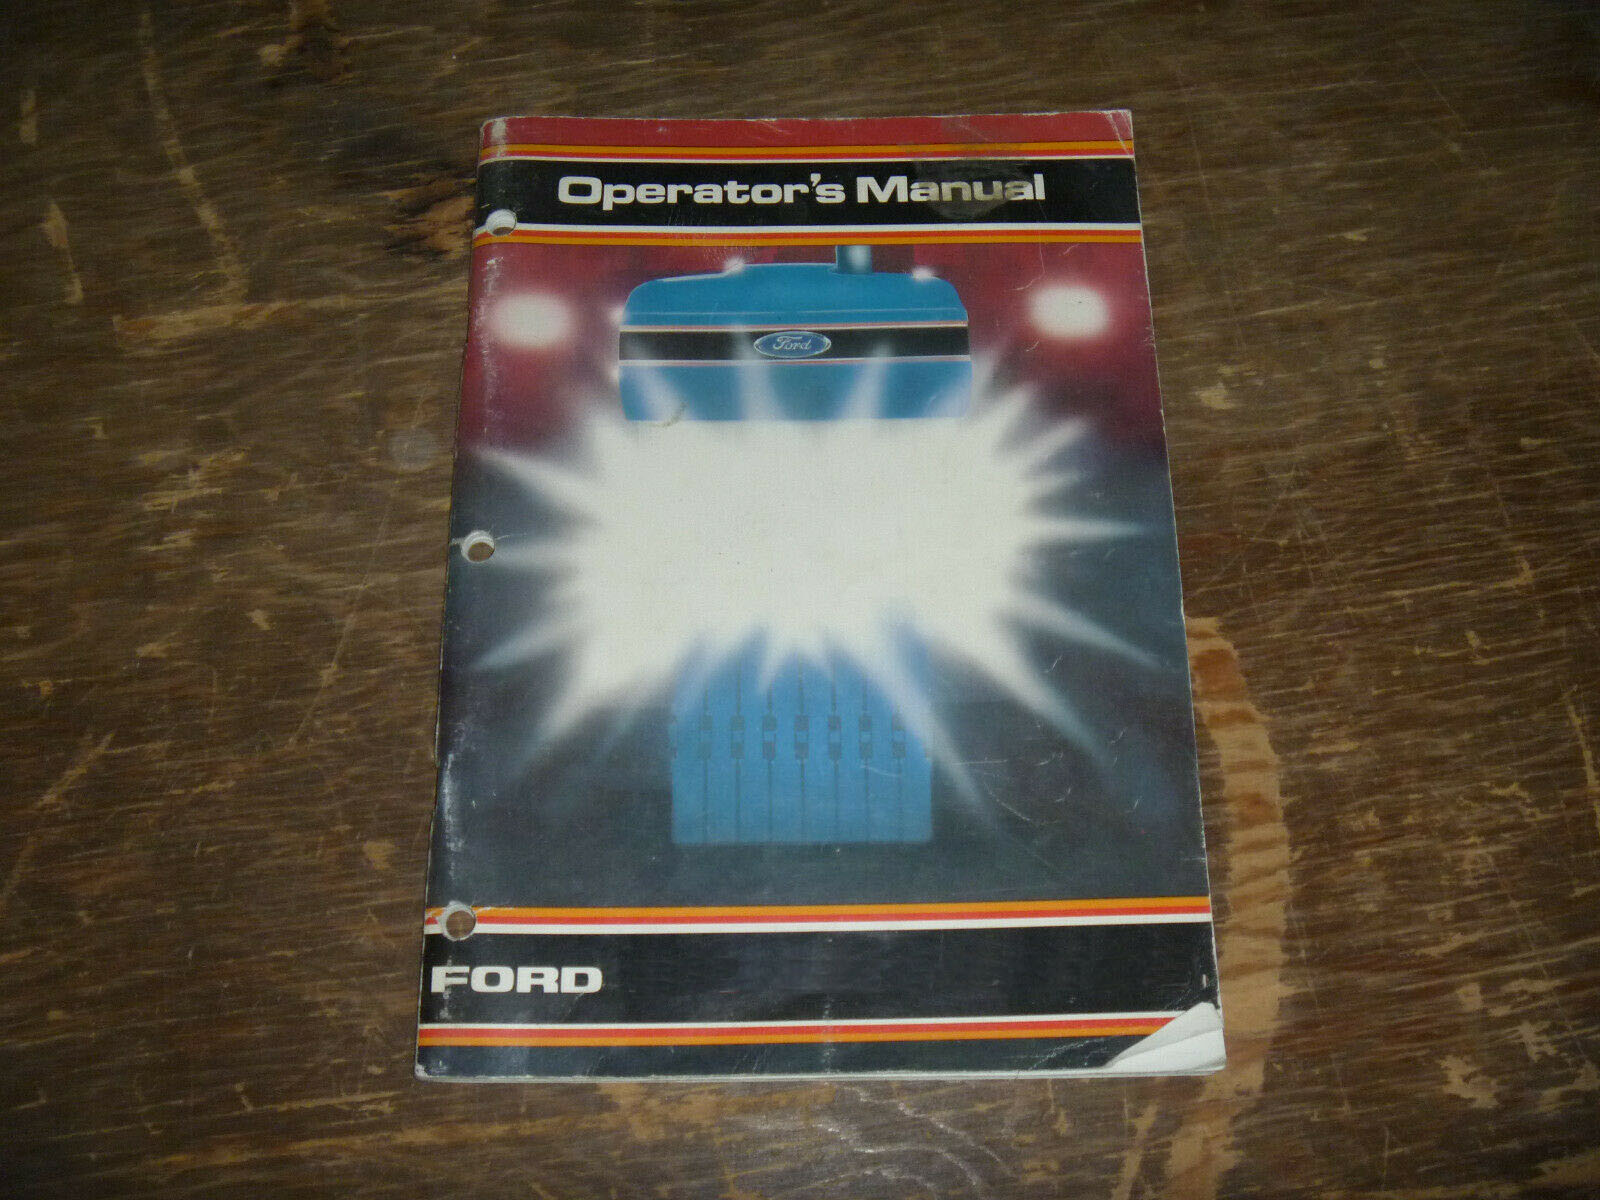 Operator's Manual for FORD Tractors model 555B